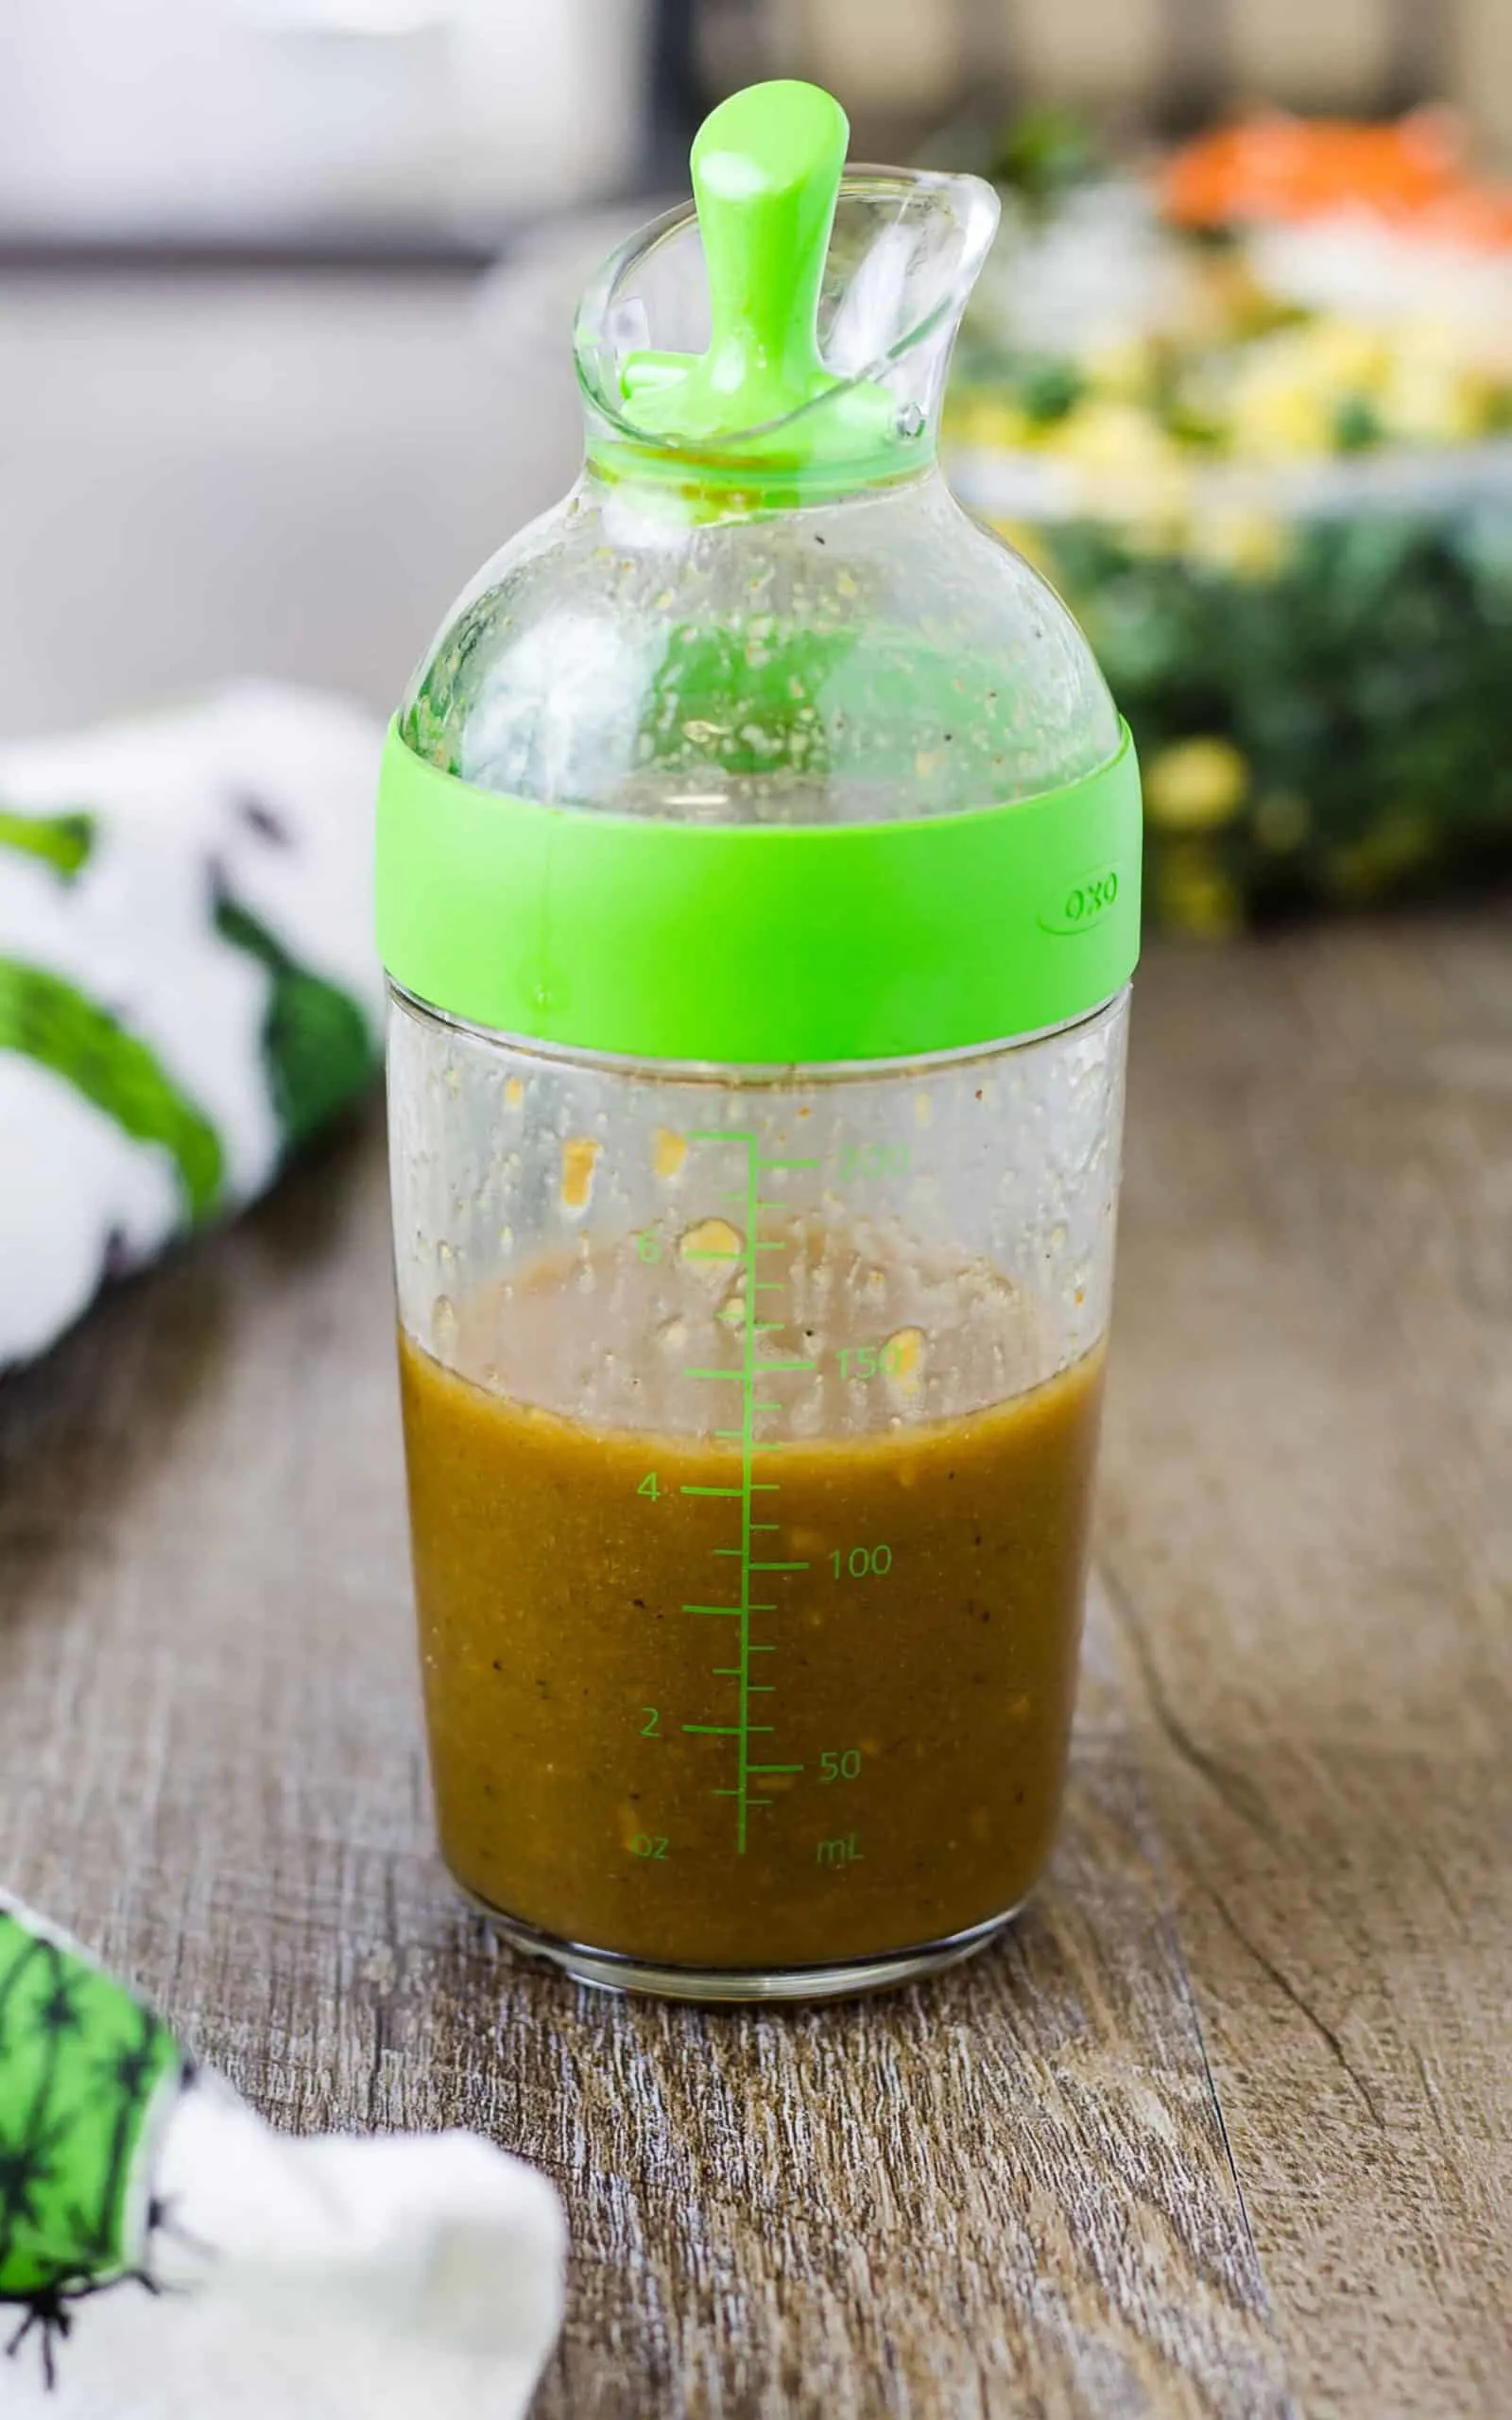 Delicious Homemade Balsamic Vinaigrette Salad Dressing in a dressing container on a wood surface